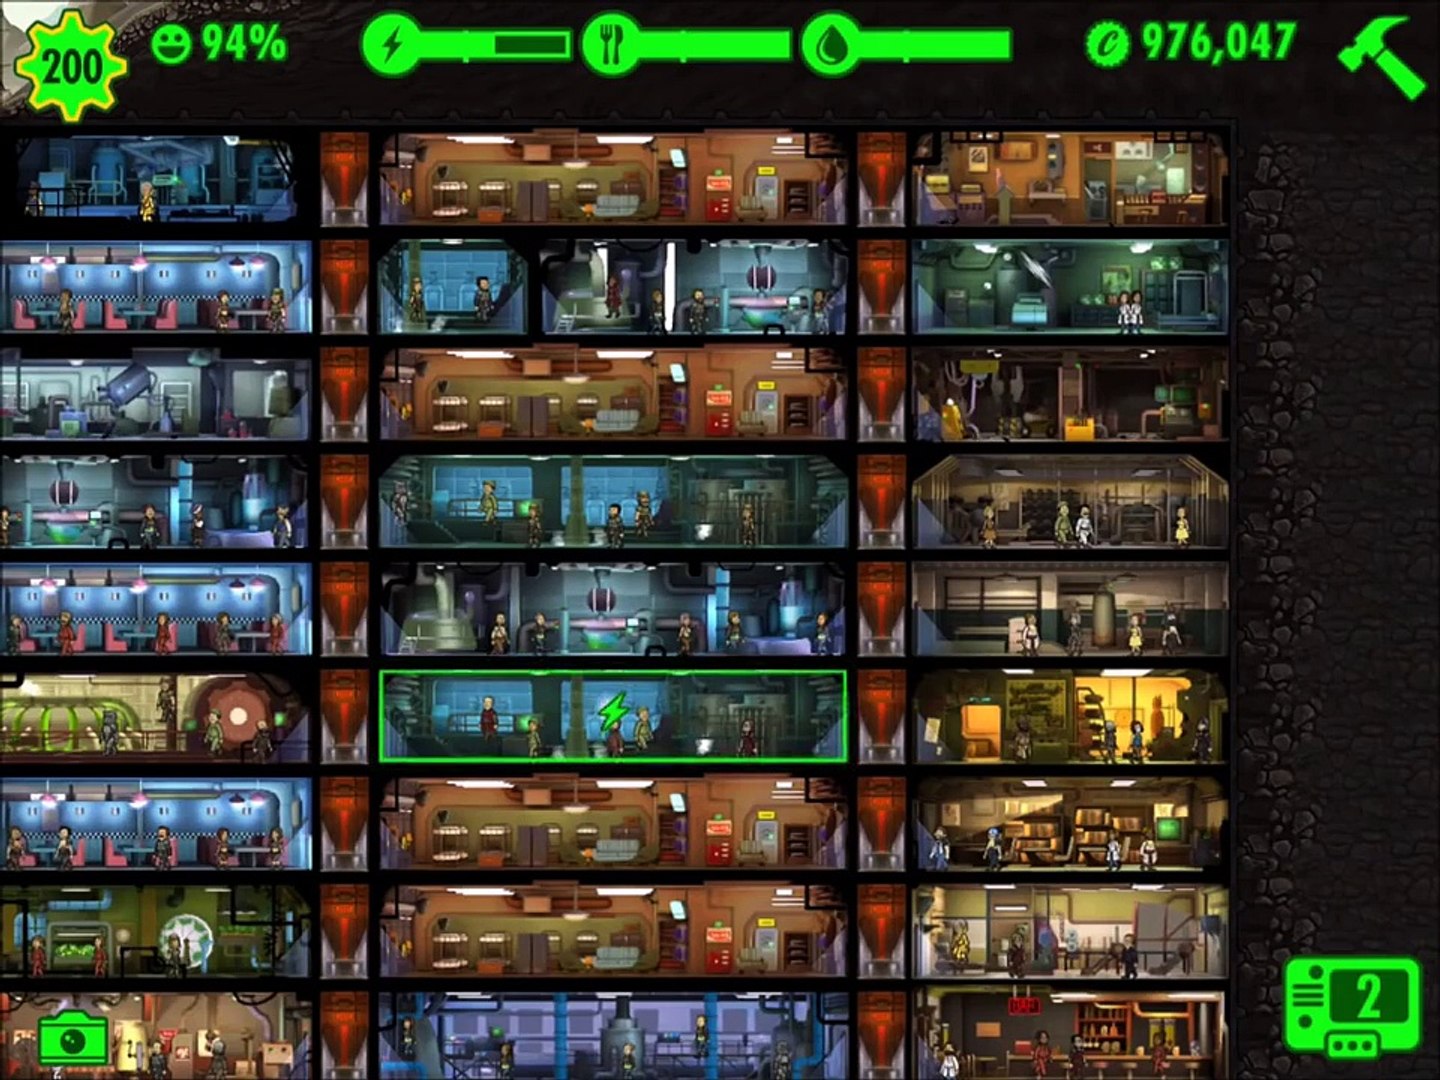 Fallout Shelter ANDROID USERS MAX BOTTLE CAPS 999,999 - Dailymotion Video